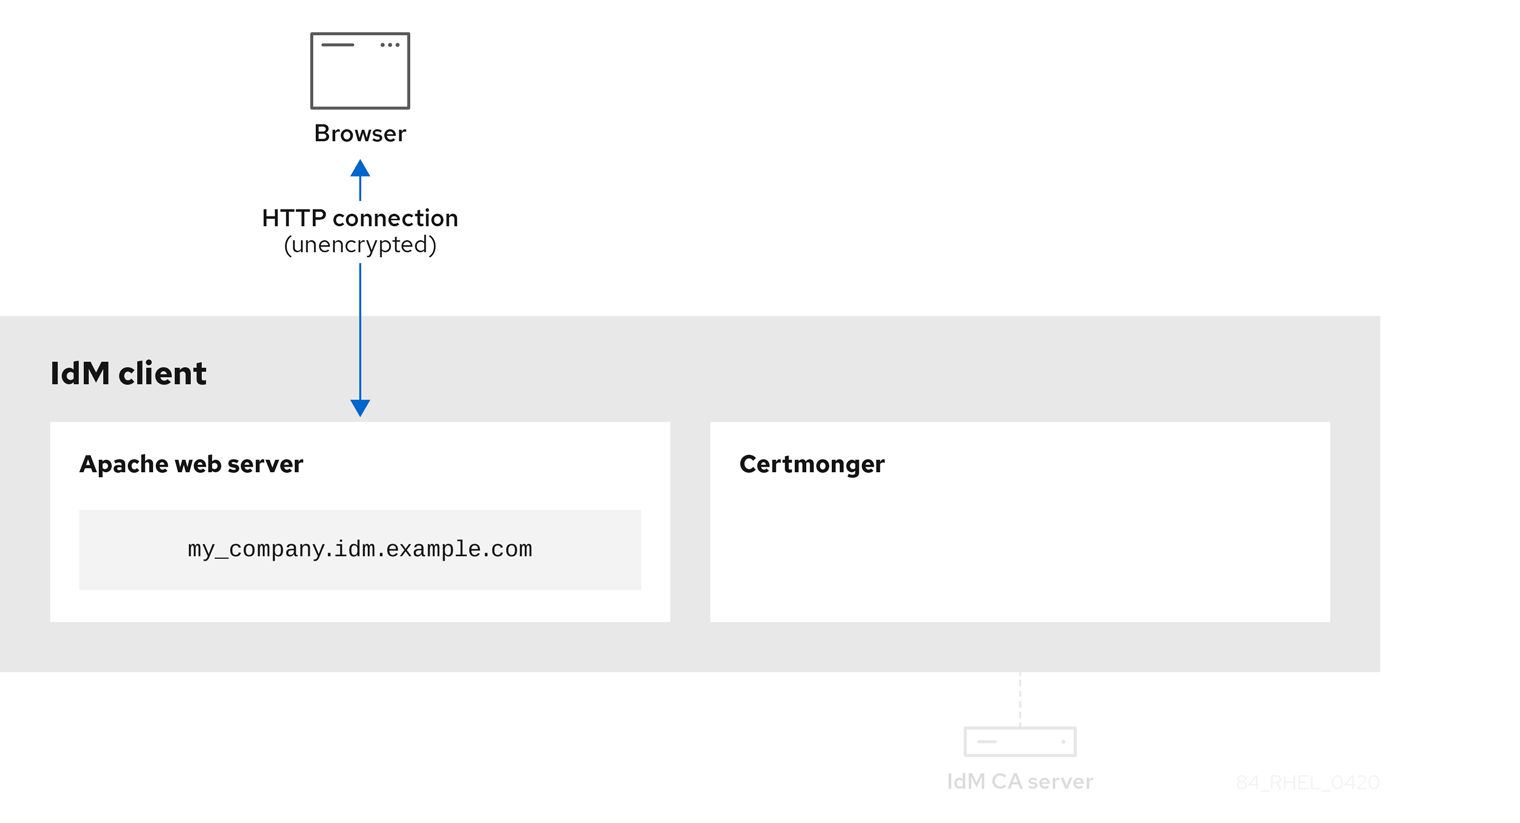 A diagram displaying an IdM client running an Apache web server and the certmonger service. There are arrows between a browser and the Apache webserver showing it is connecting over an unencrypted HTTP connection. There is an inactive connection from the certmonger service to an IdM CA server.